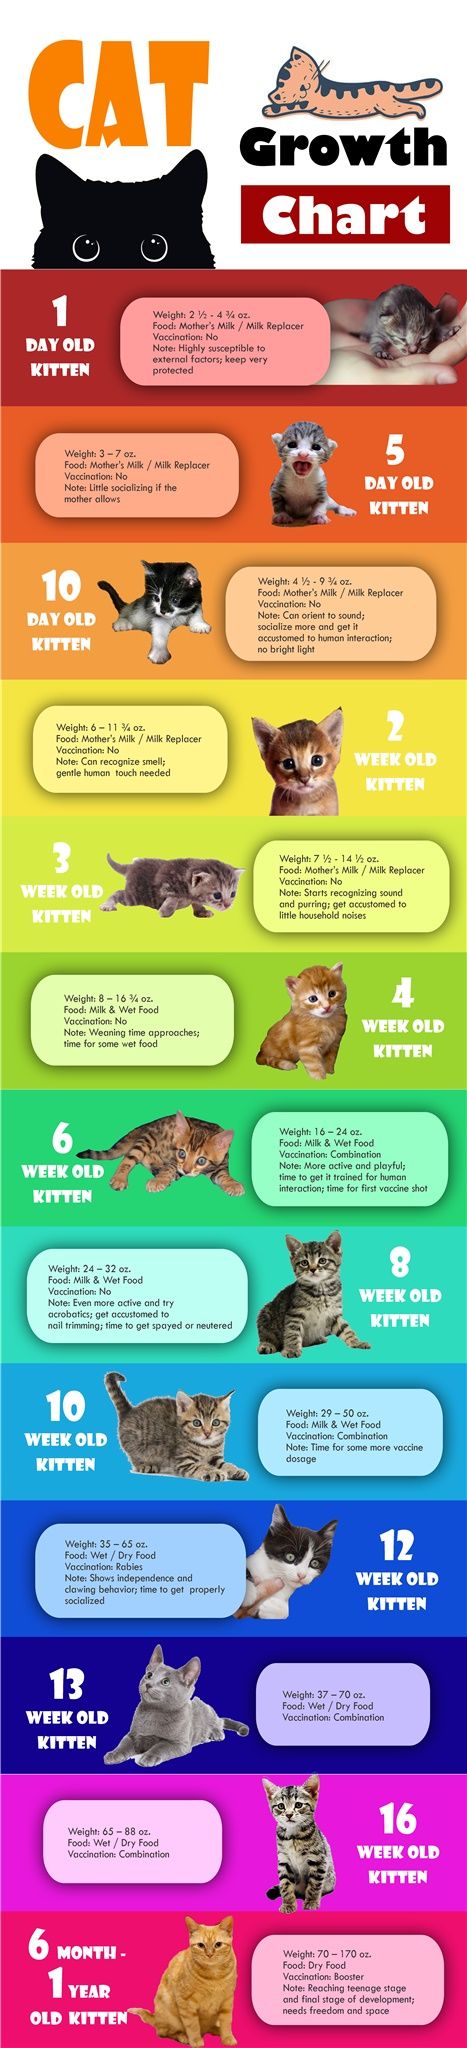 Kitten Cat Growth Chart infographic by Age, Weight and Food